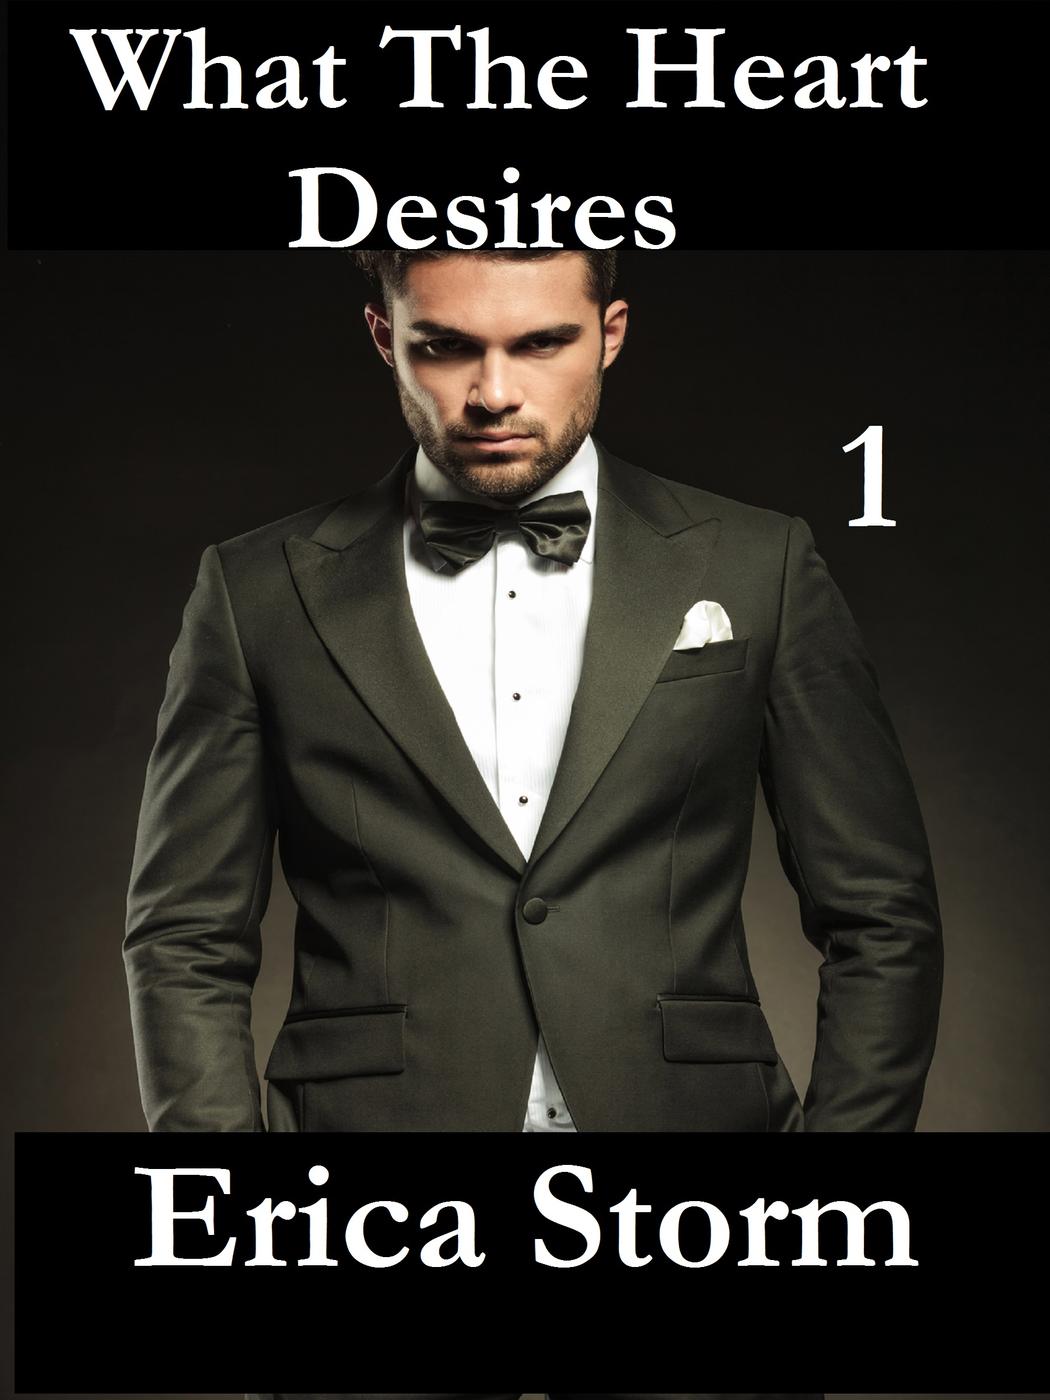 What The Heart Desires (2015) by Erica Storm